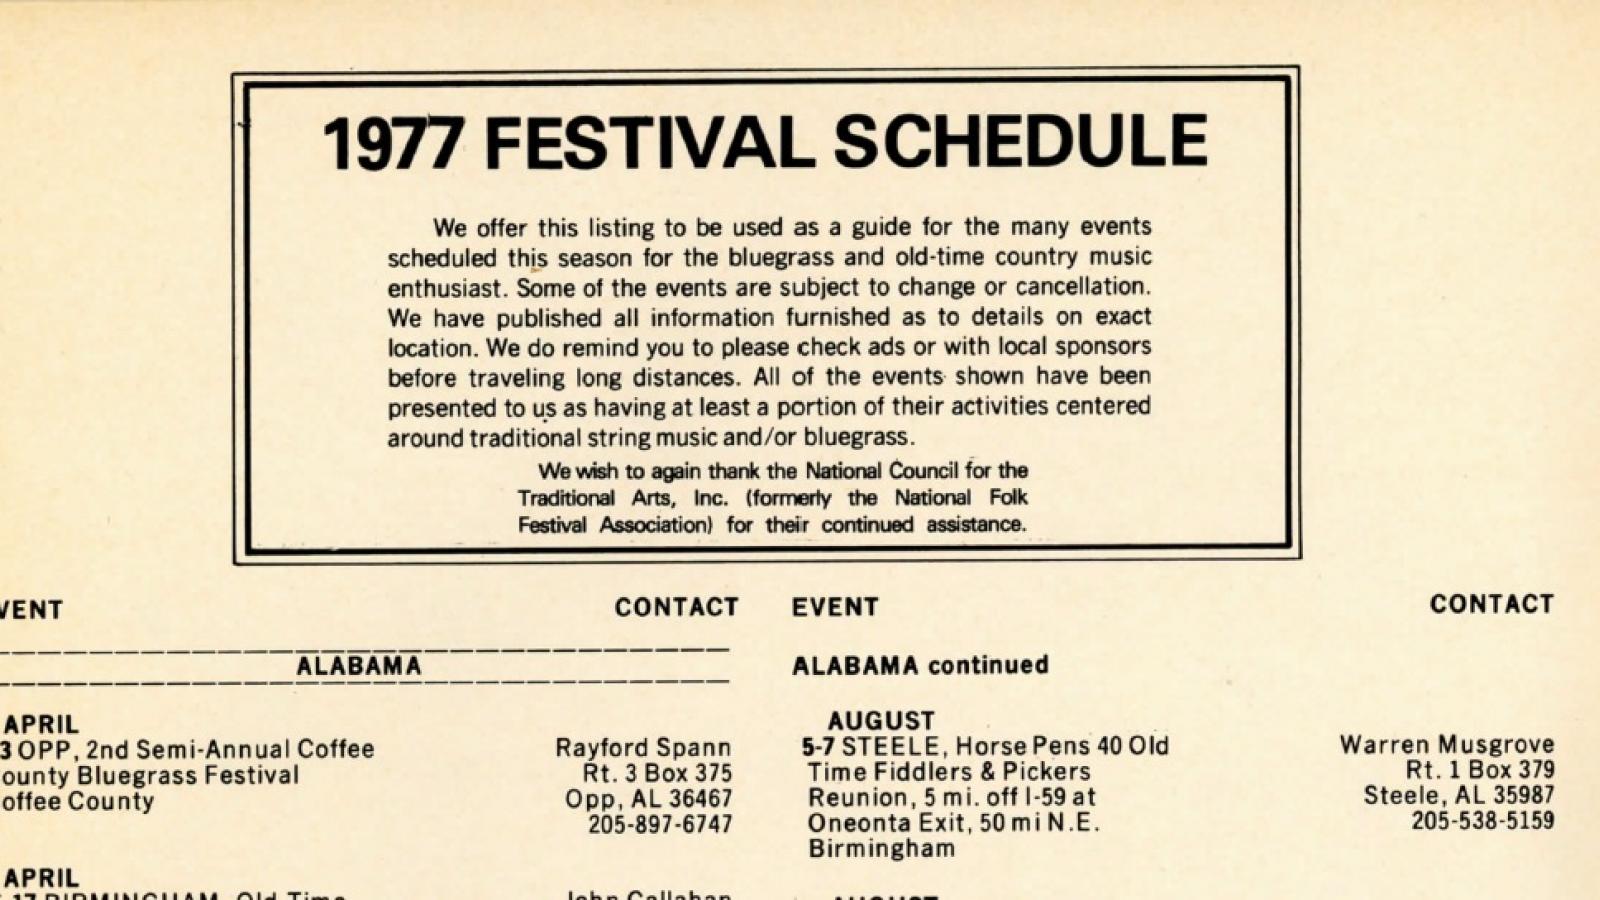 Listing of U.S. Bluegrass festivals in the spring and summer of 1977 in Bluegrass 77 magazine.